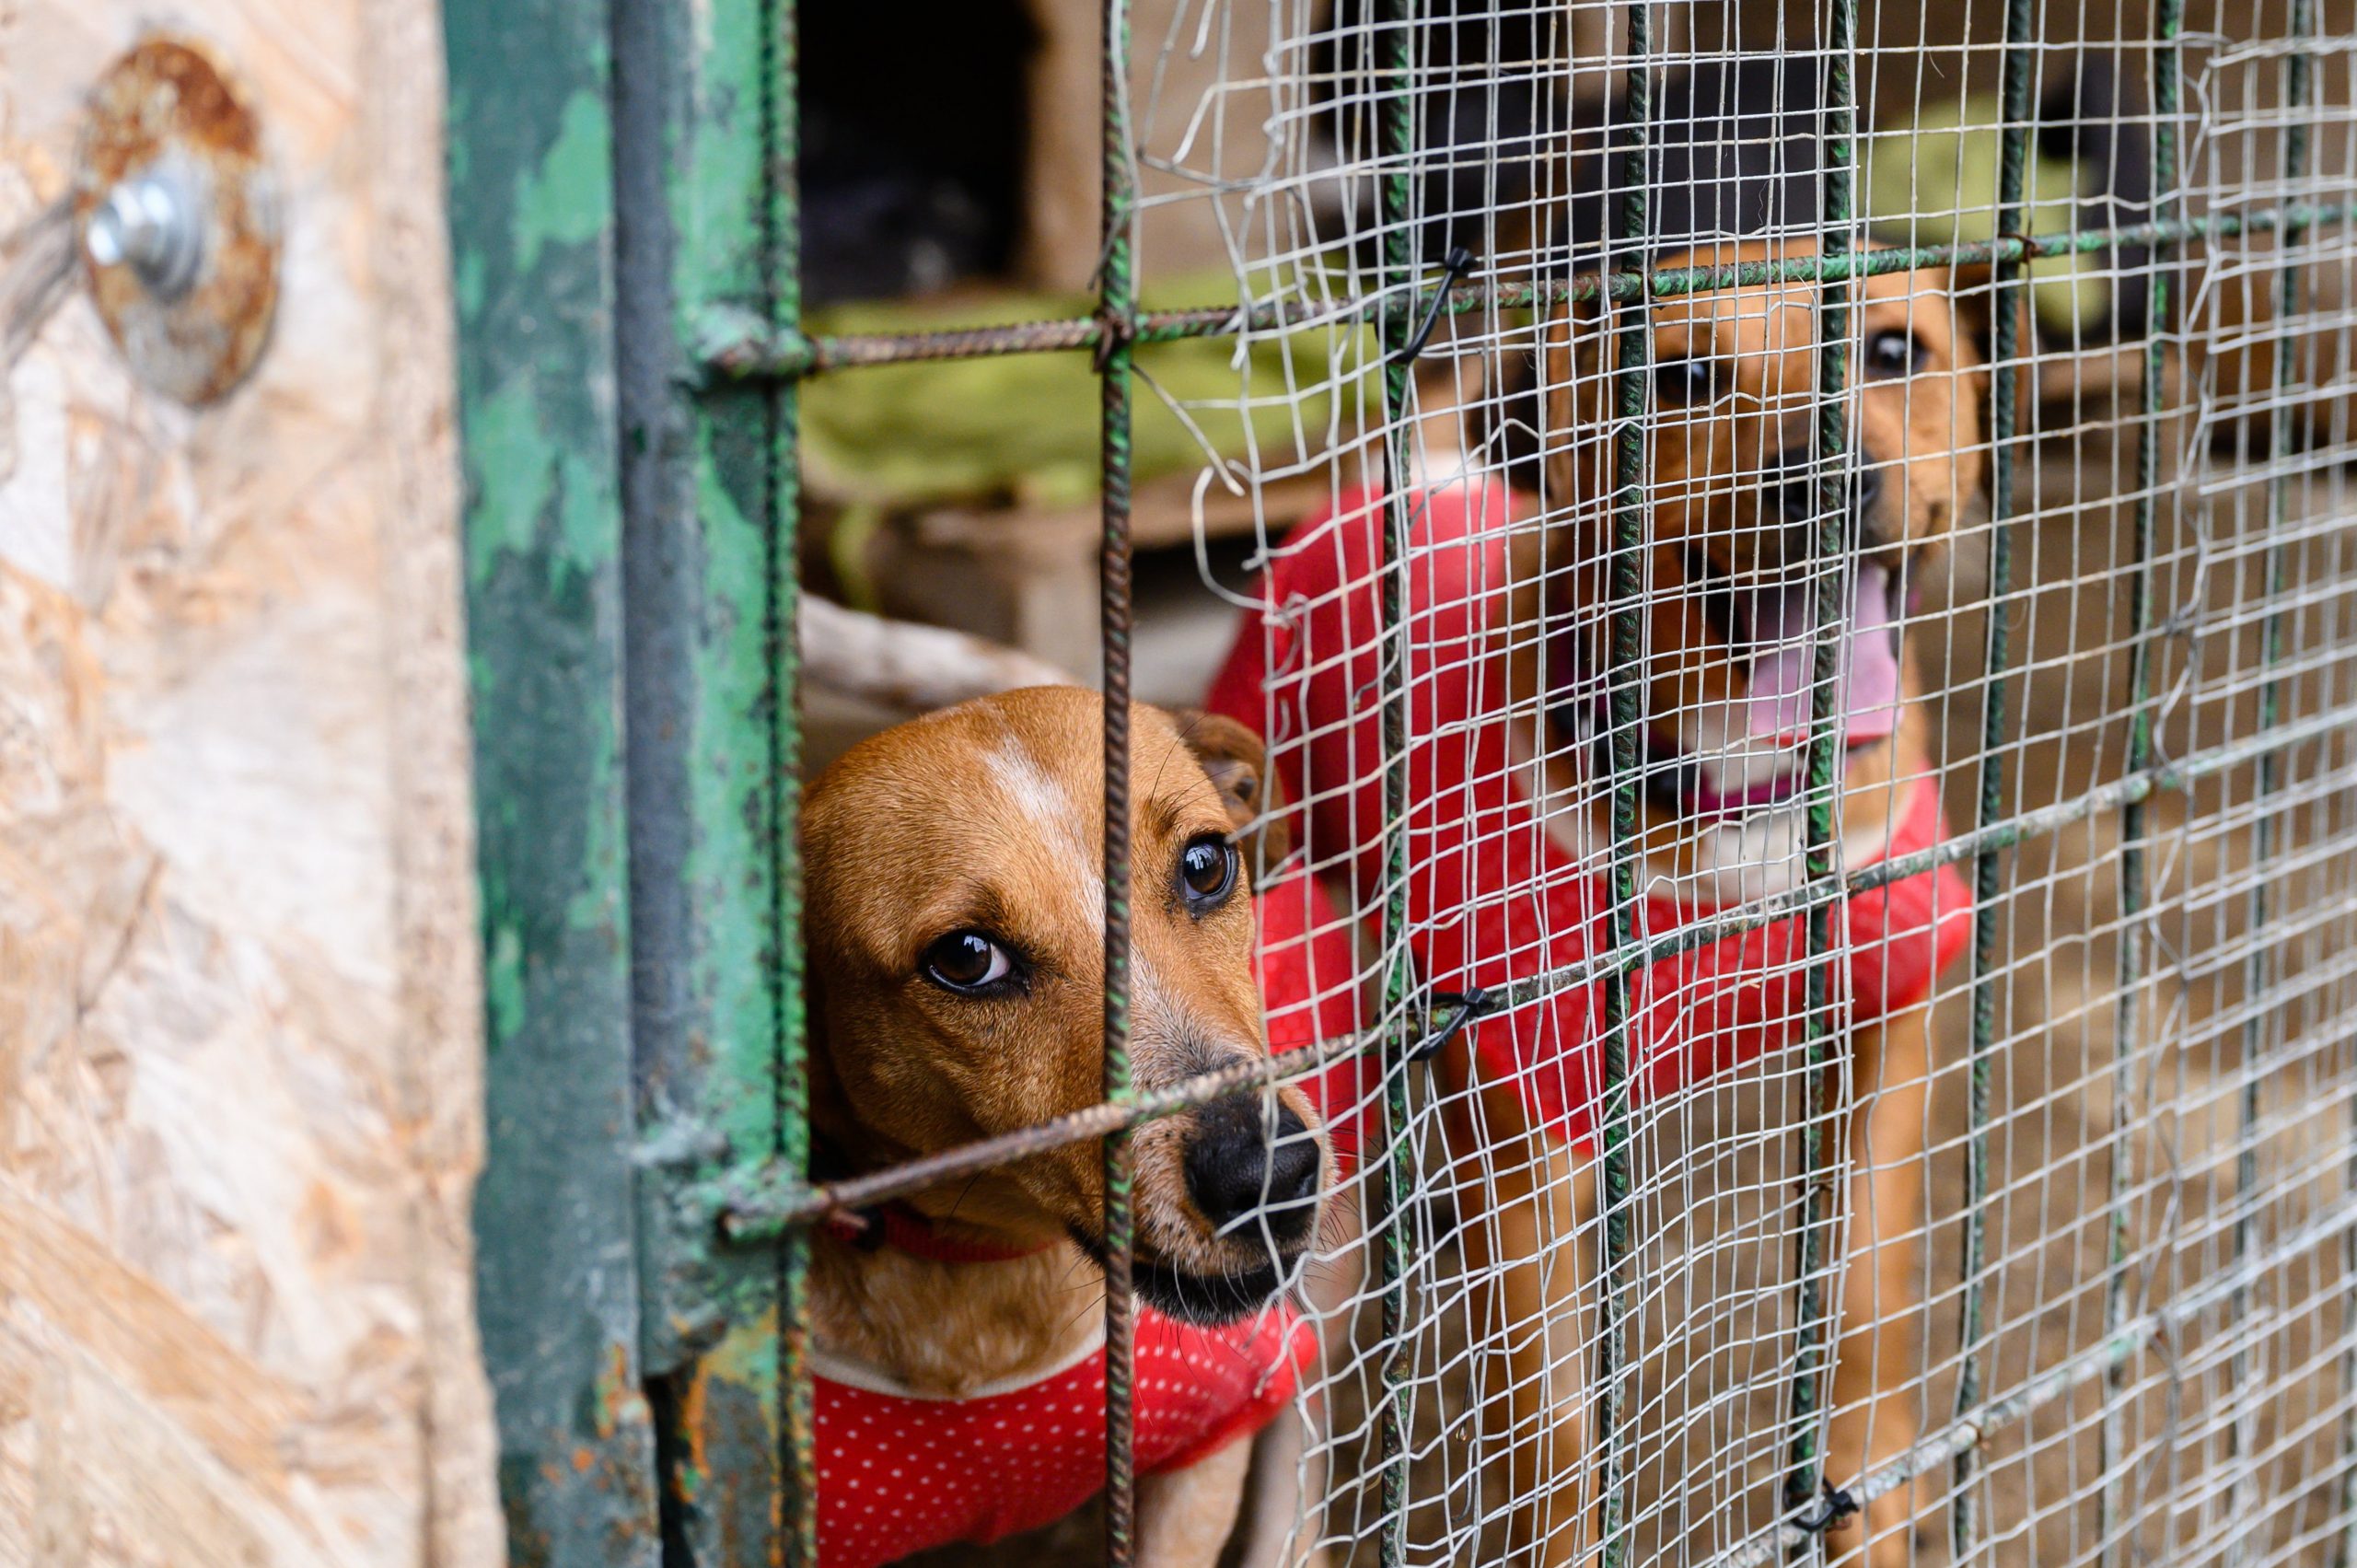 Animal welfare law strengthened in Hungary